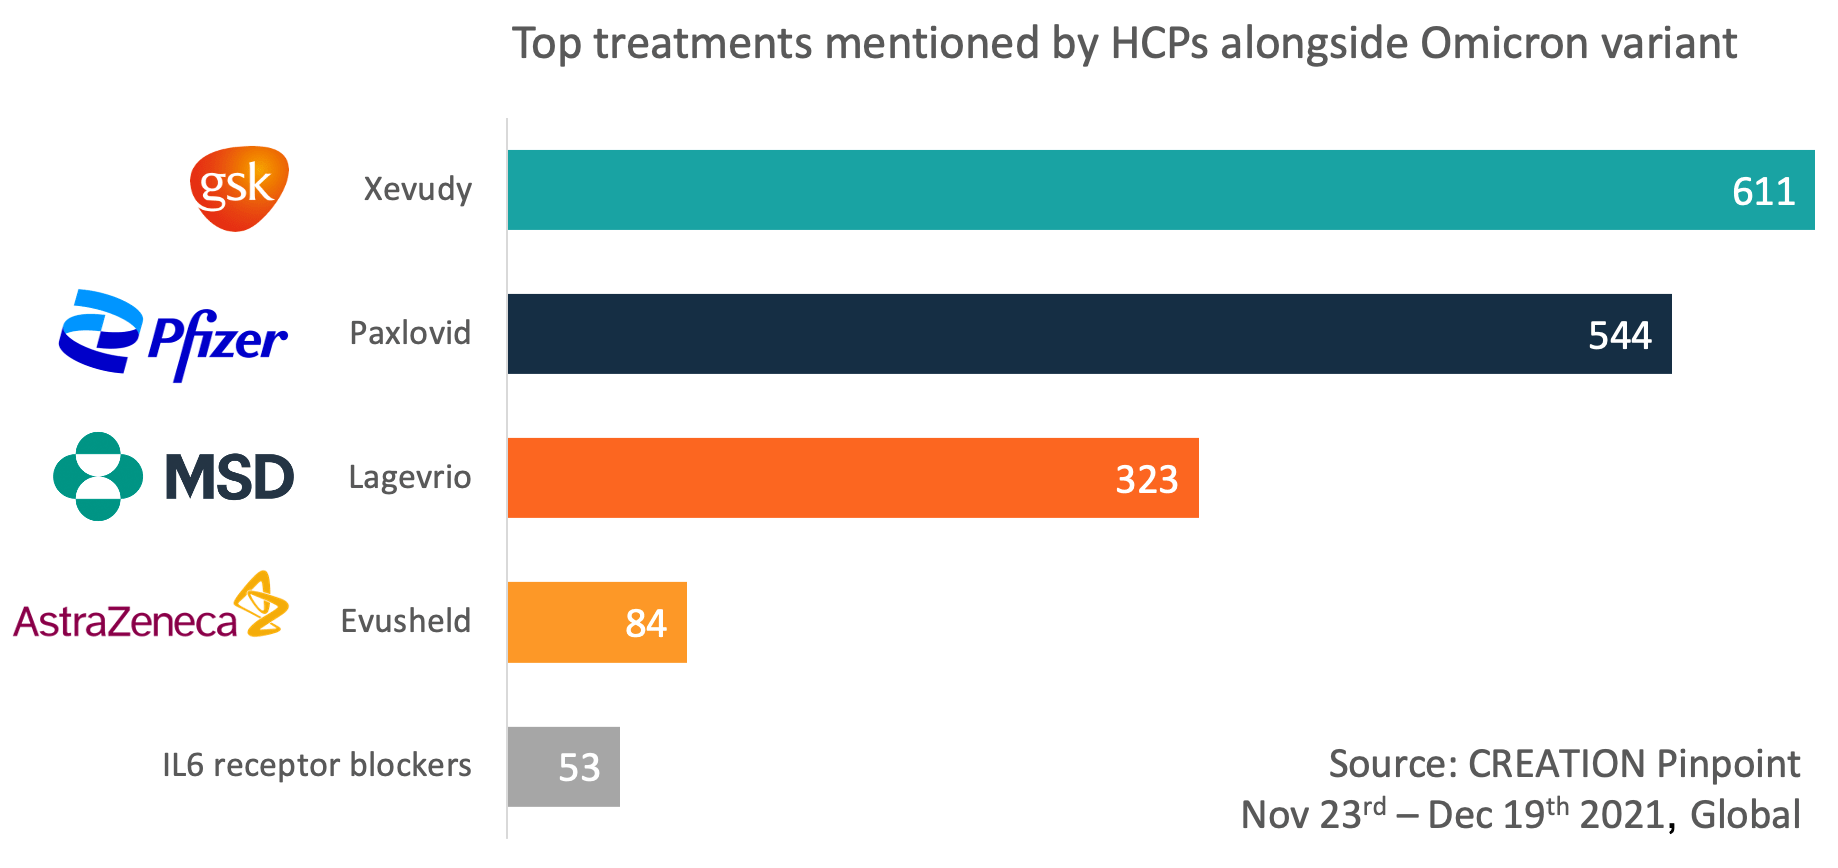 Top six treatments mentioned by HCPs alongside Omicron variant